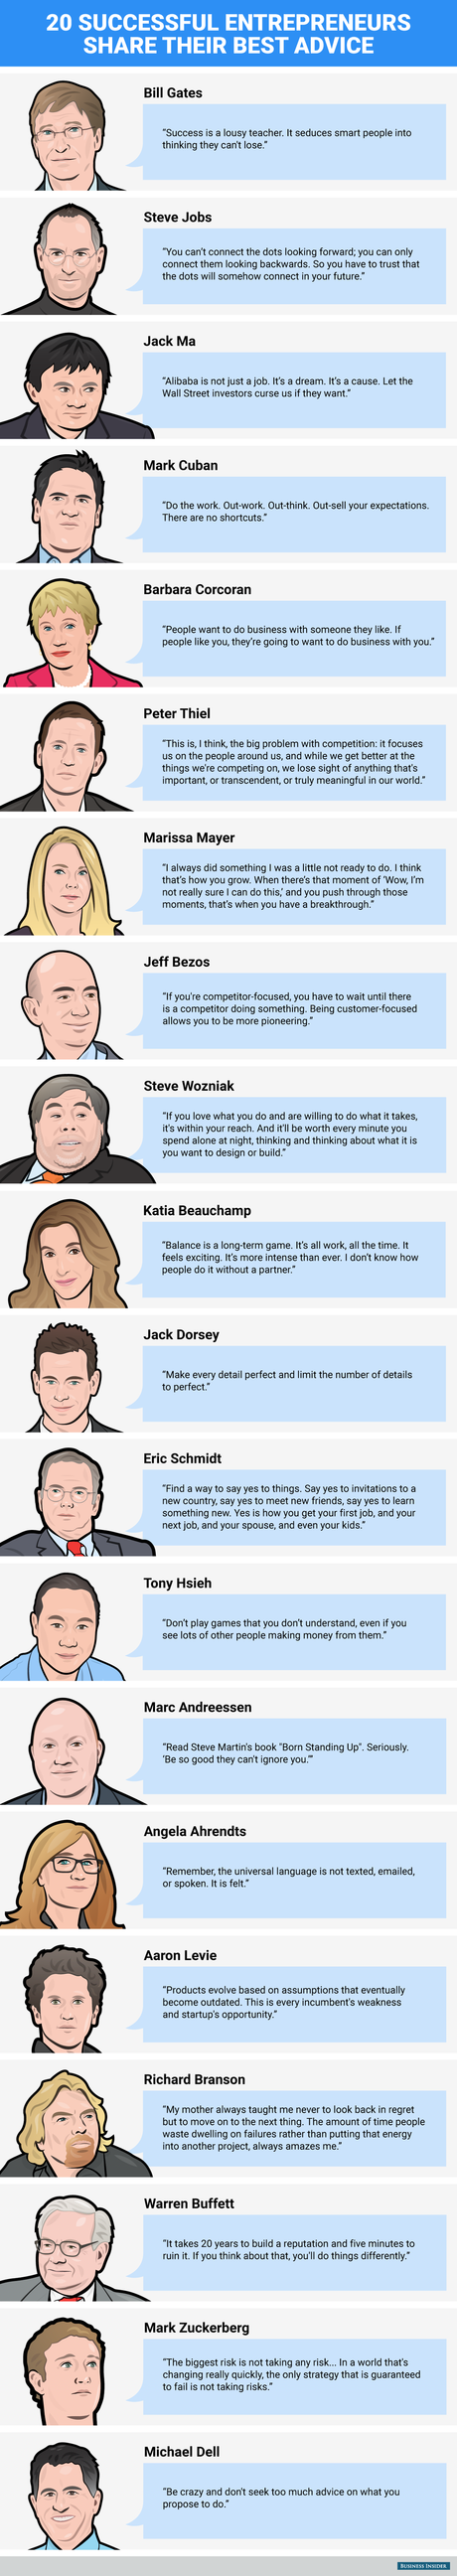 Successful Entrepreneurs Share Their Best Advise On Decision Making